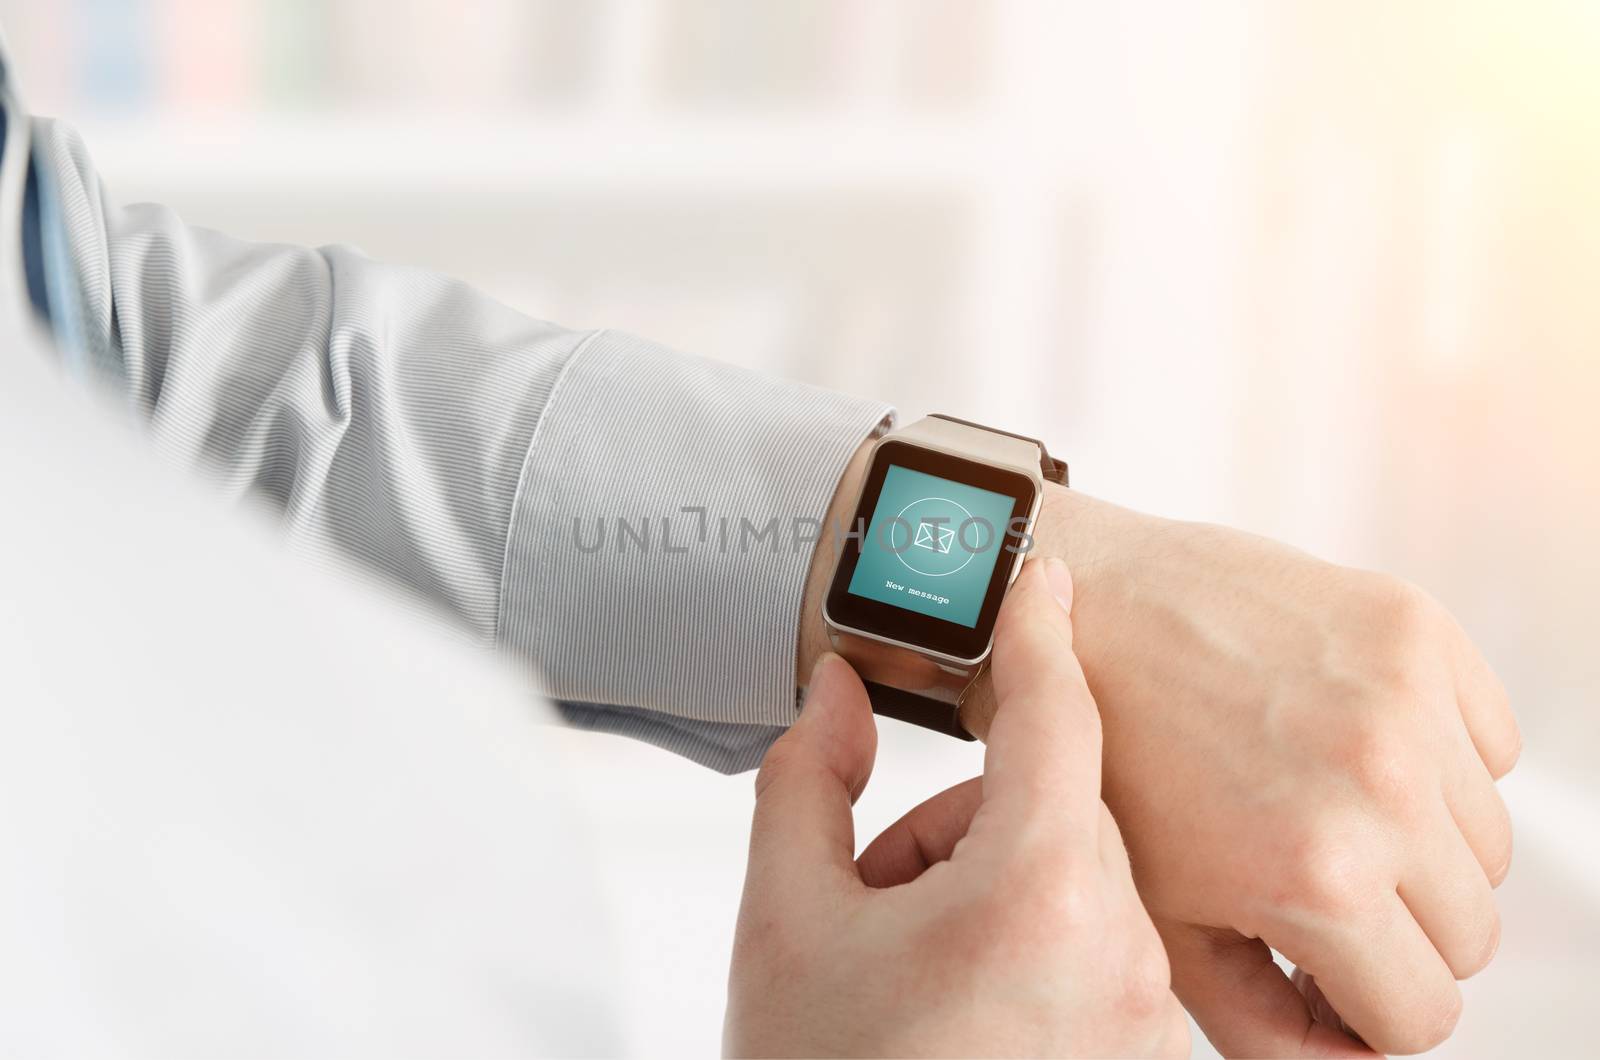 Man using smartwatch with e-mail notifier. smartwatch hand device notify computer internet message e-mail concept